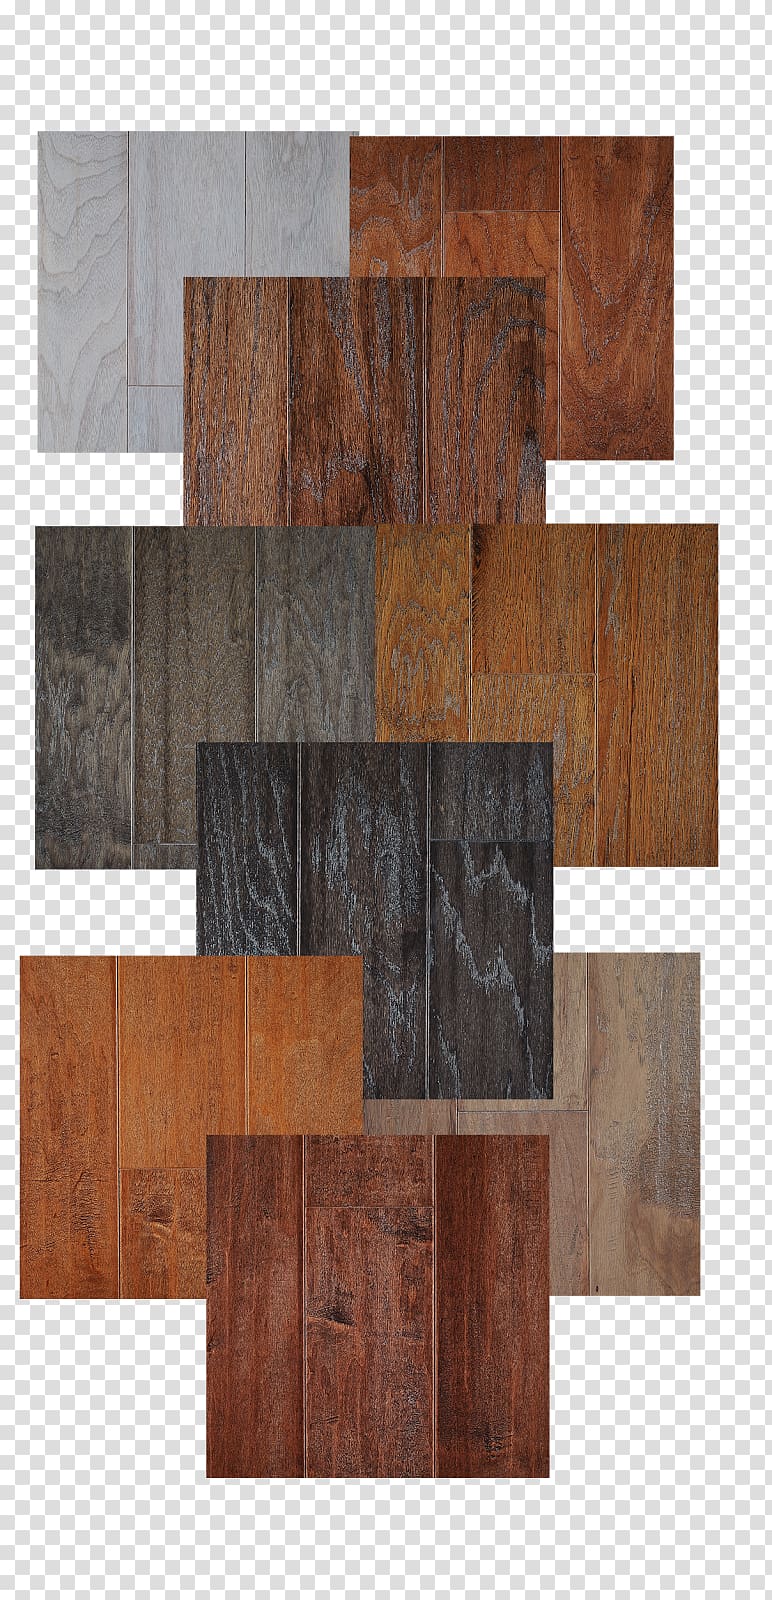 Wood flooring Hardwood Wood stain, wood transparent background PNG clipart